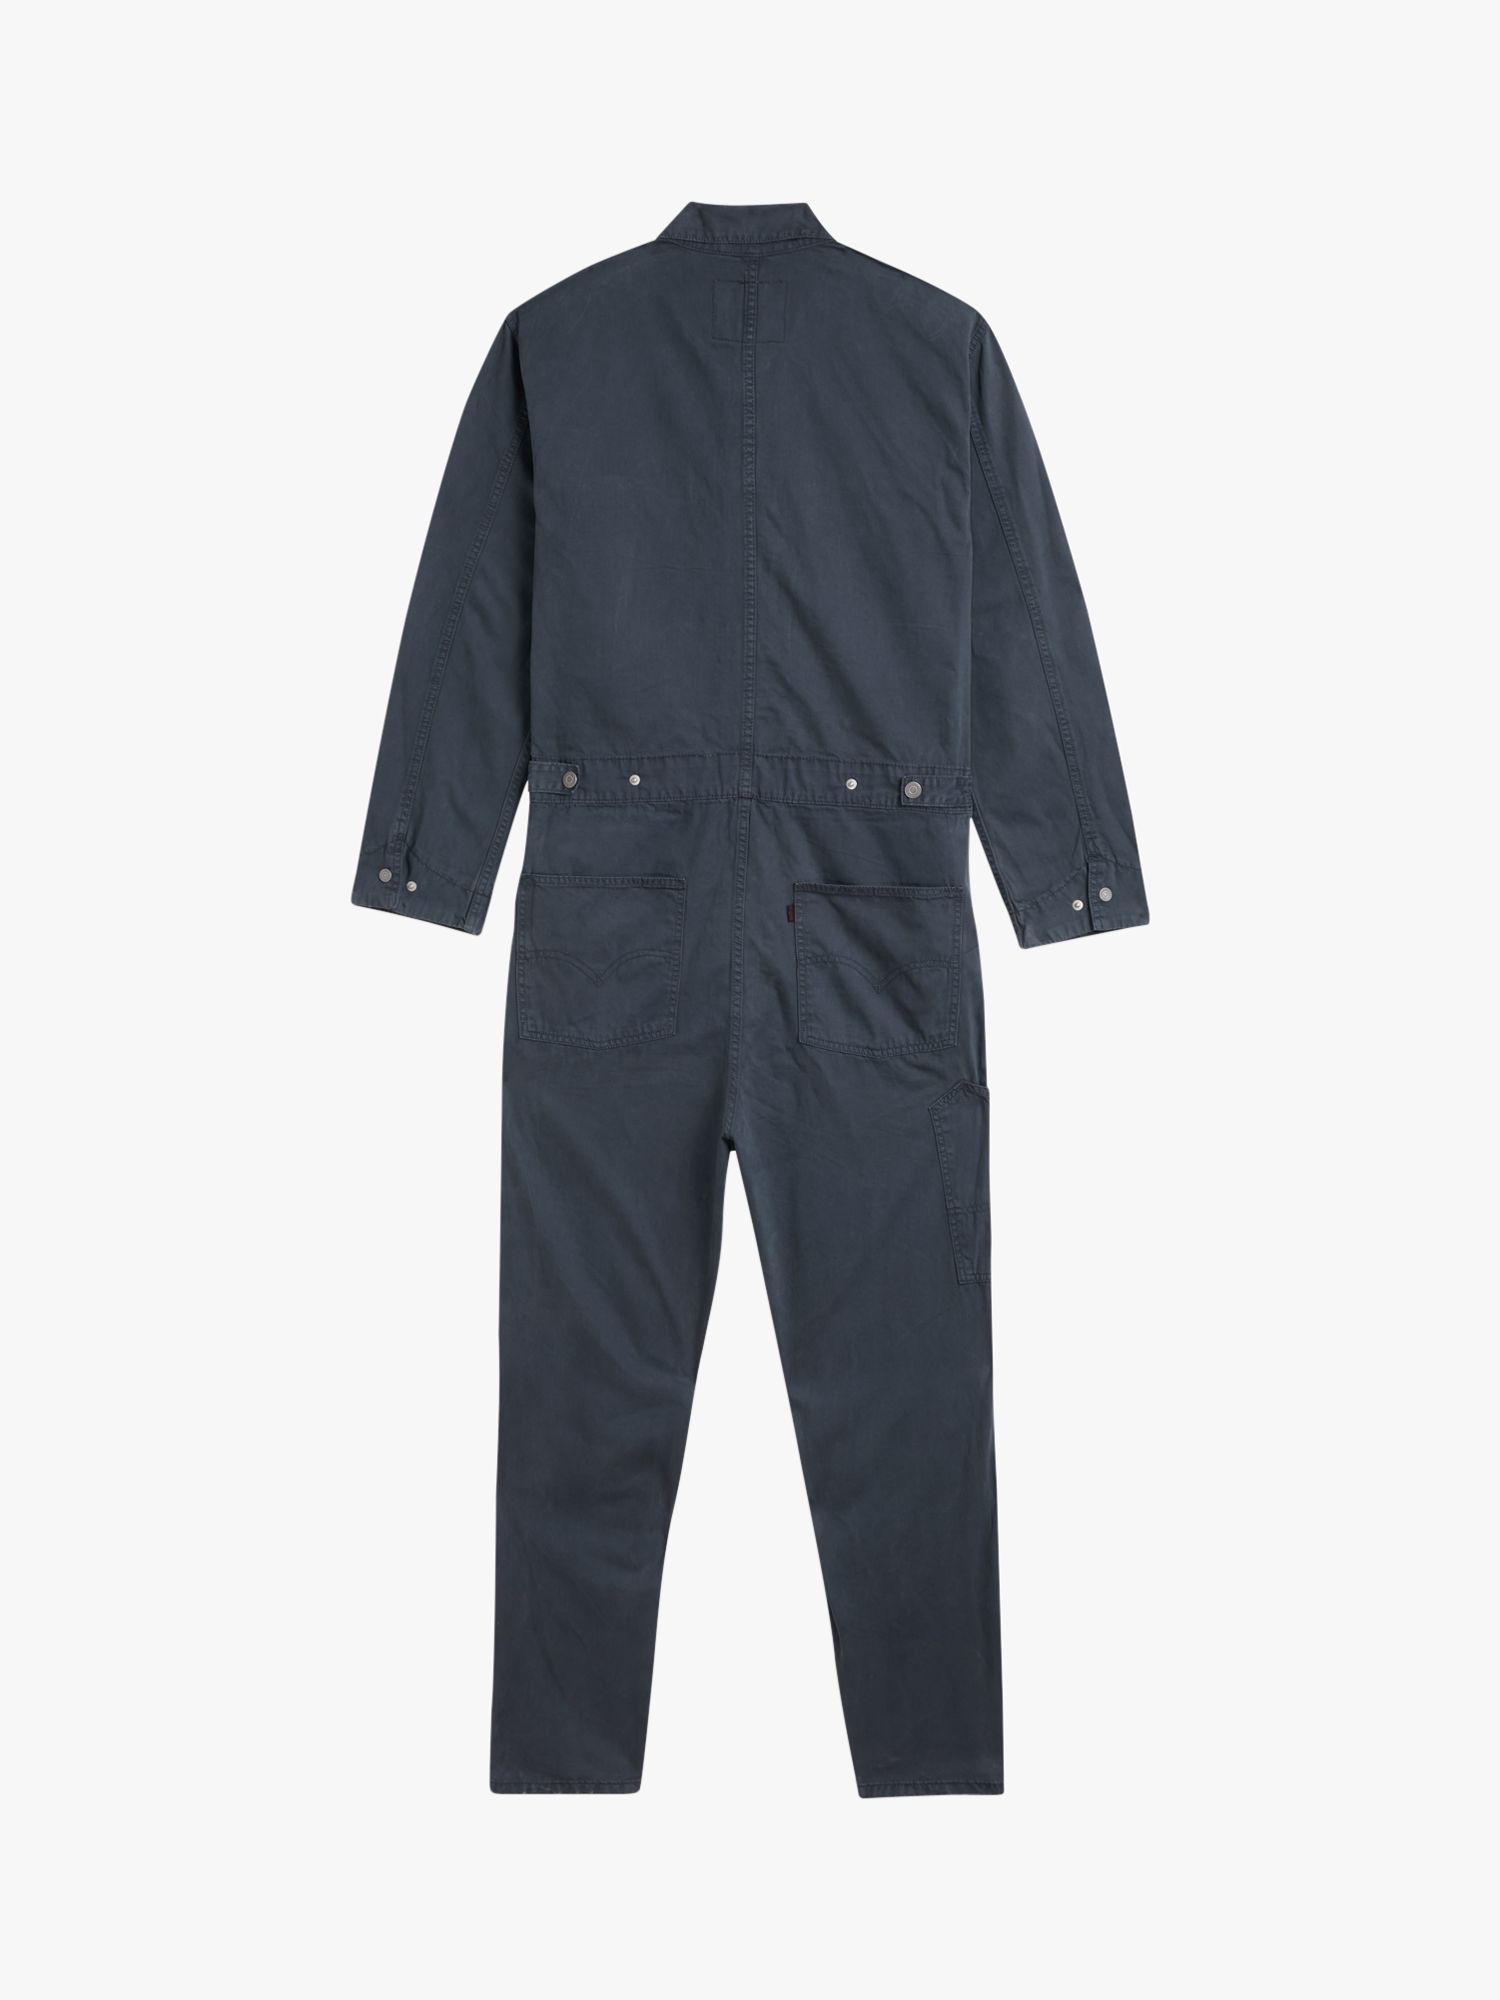 NEW Levi’s Mens STAY LOOSE Coveralls in Check Engine - seensociety.com